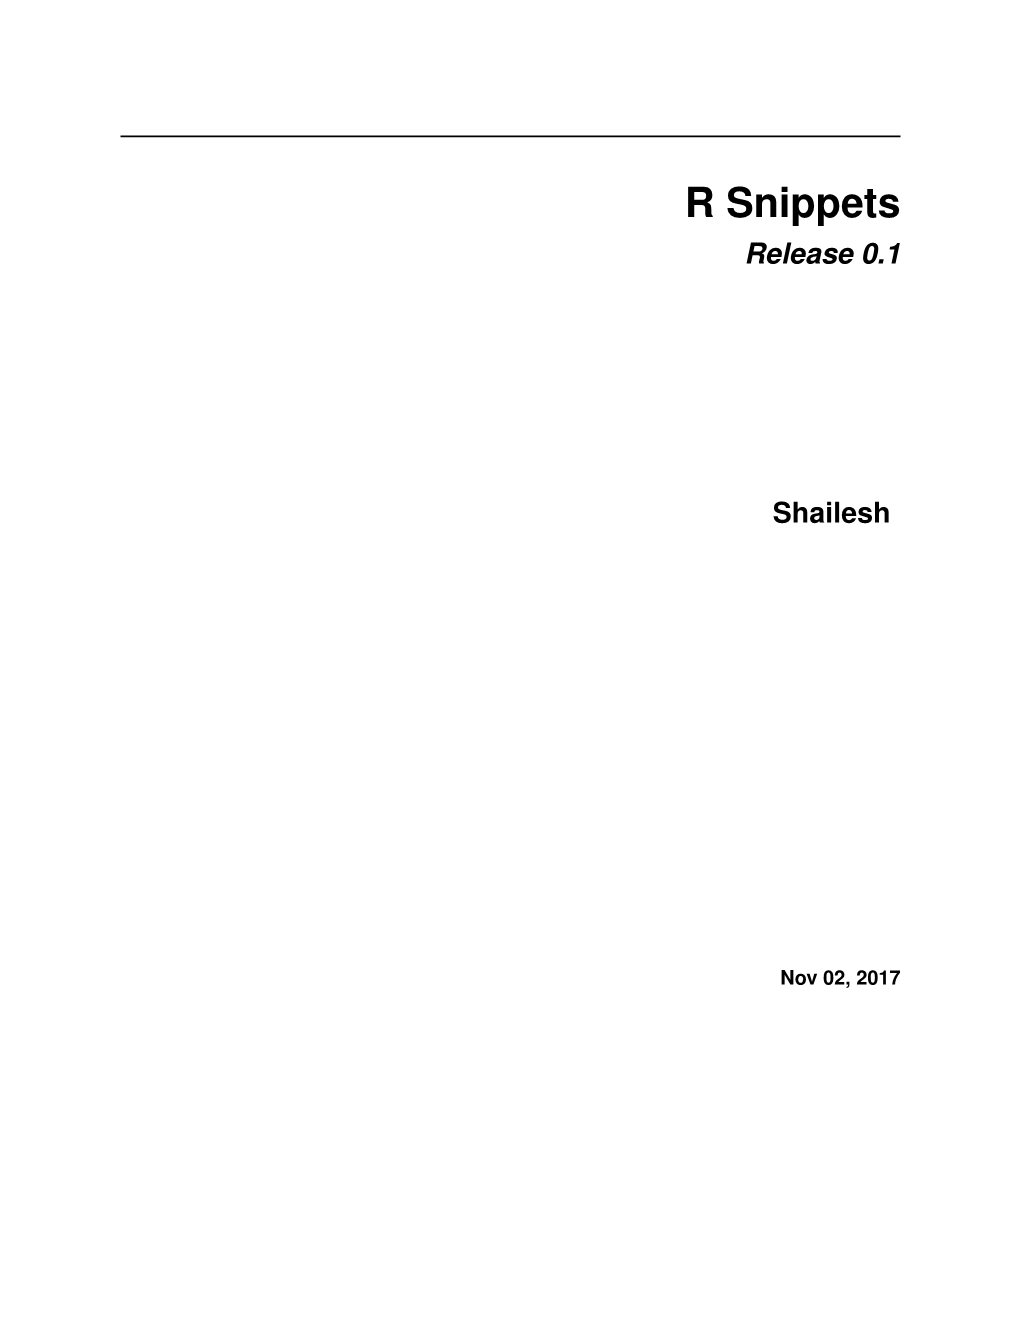 R Snippets Release 0.1